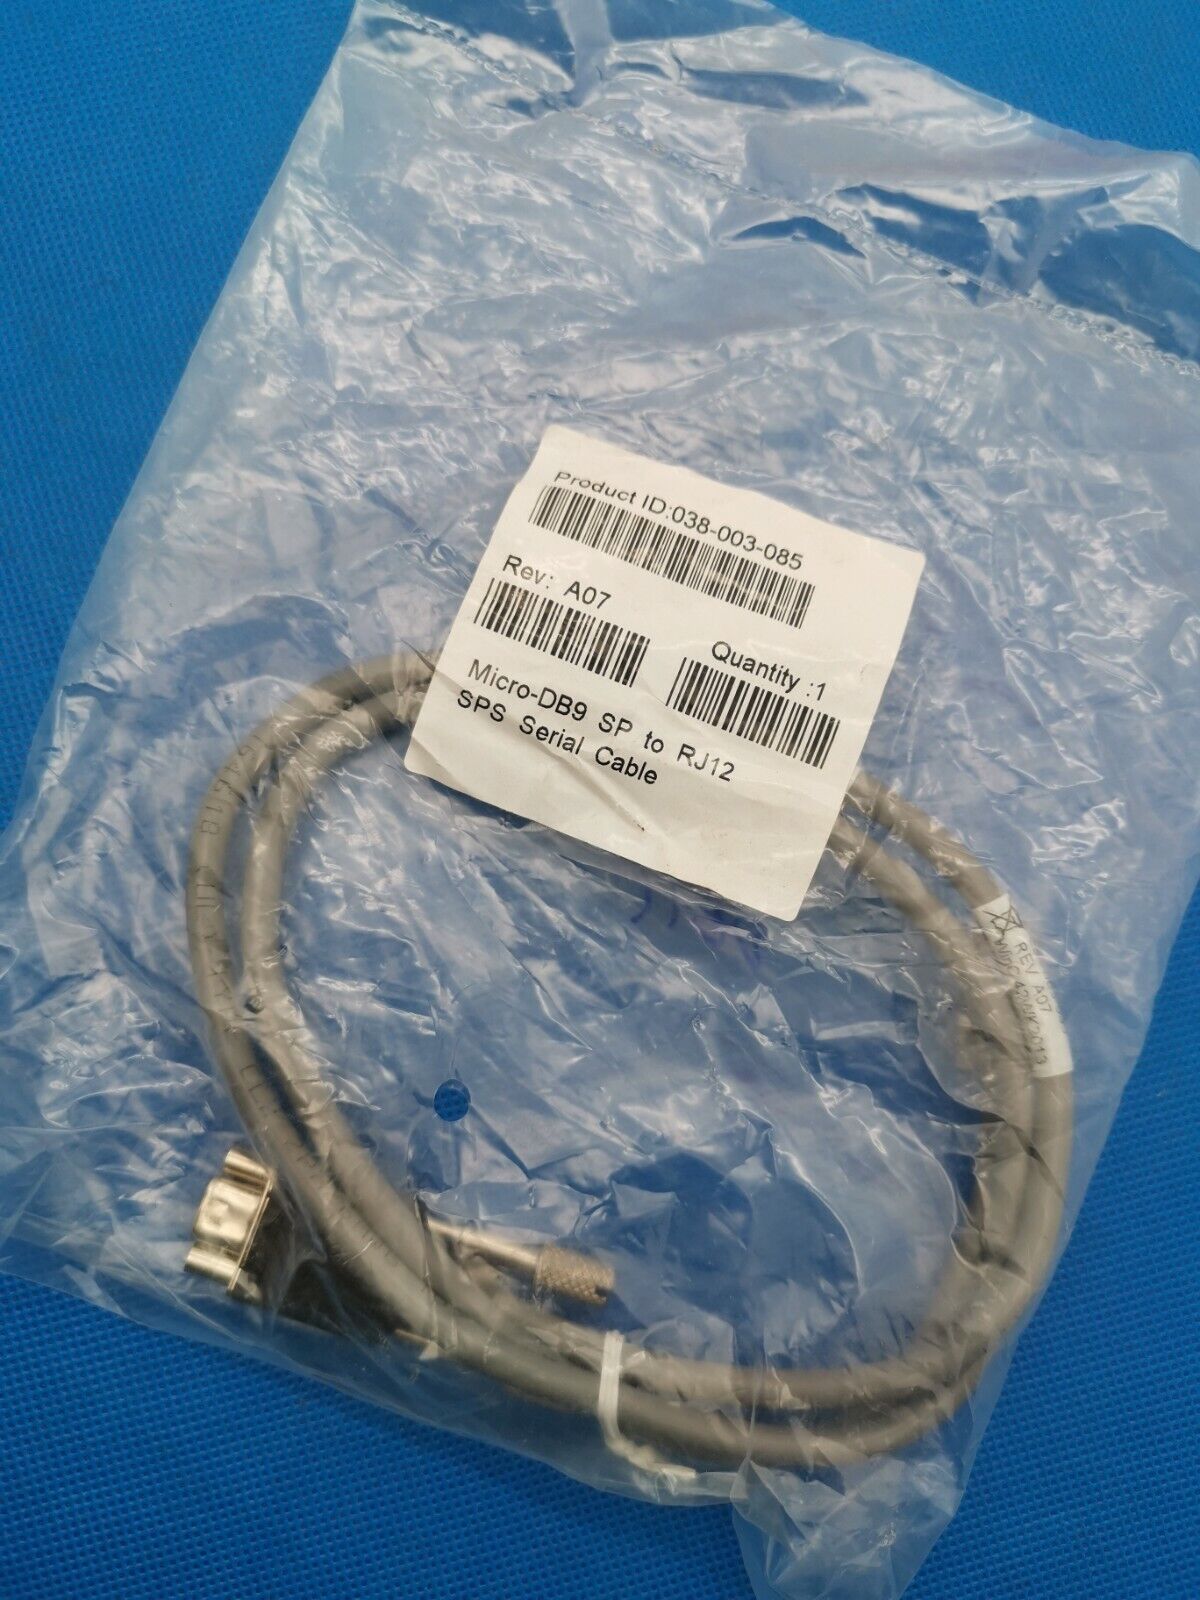 NEW Genuine Dell EMC 038-003-085 MICRO DB9 TO RJ12 SPS SERIAL CABLE 038-003-085